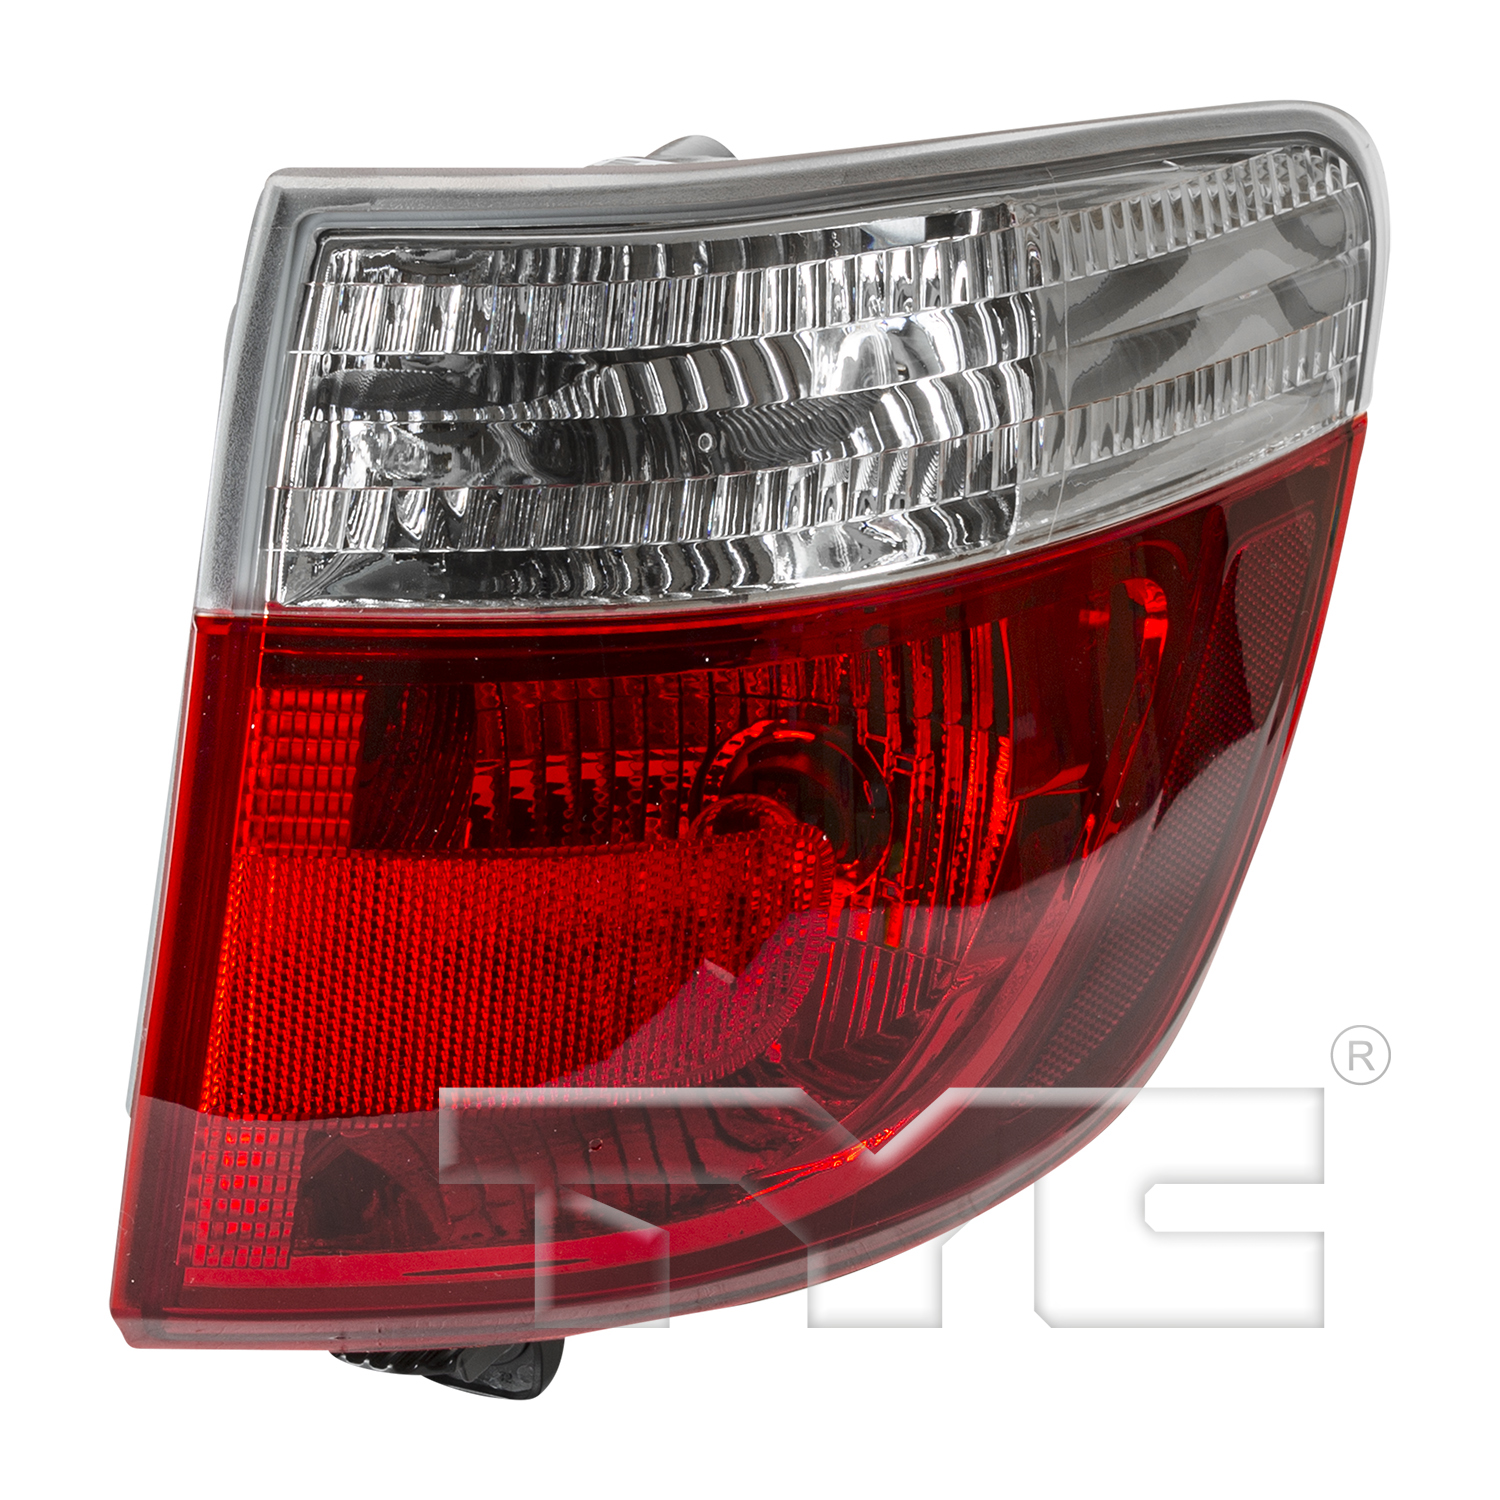 Aftermarket TAILLIGHTS for DODGE - DURANGO, DURANGO,11-13,RT Taillamp assy outer